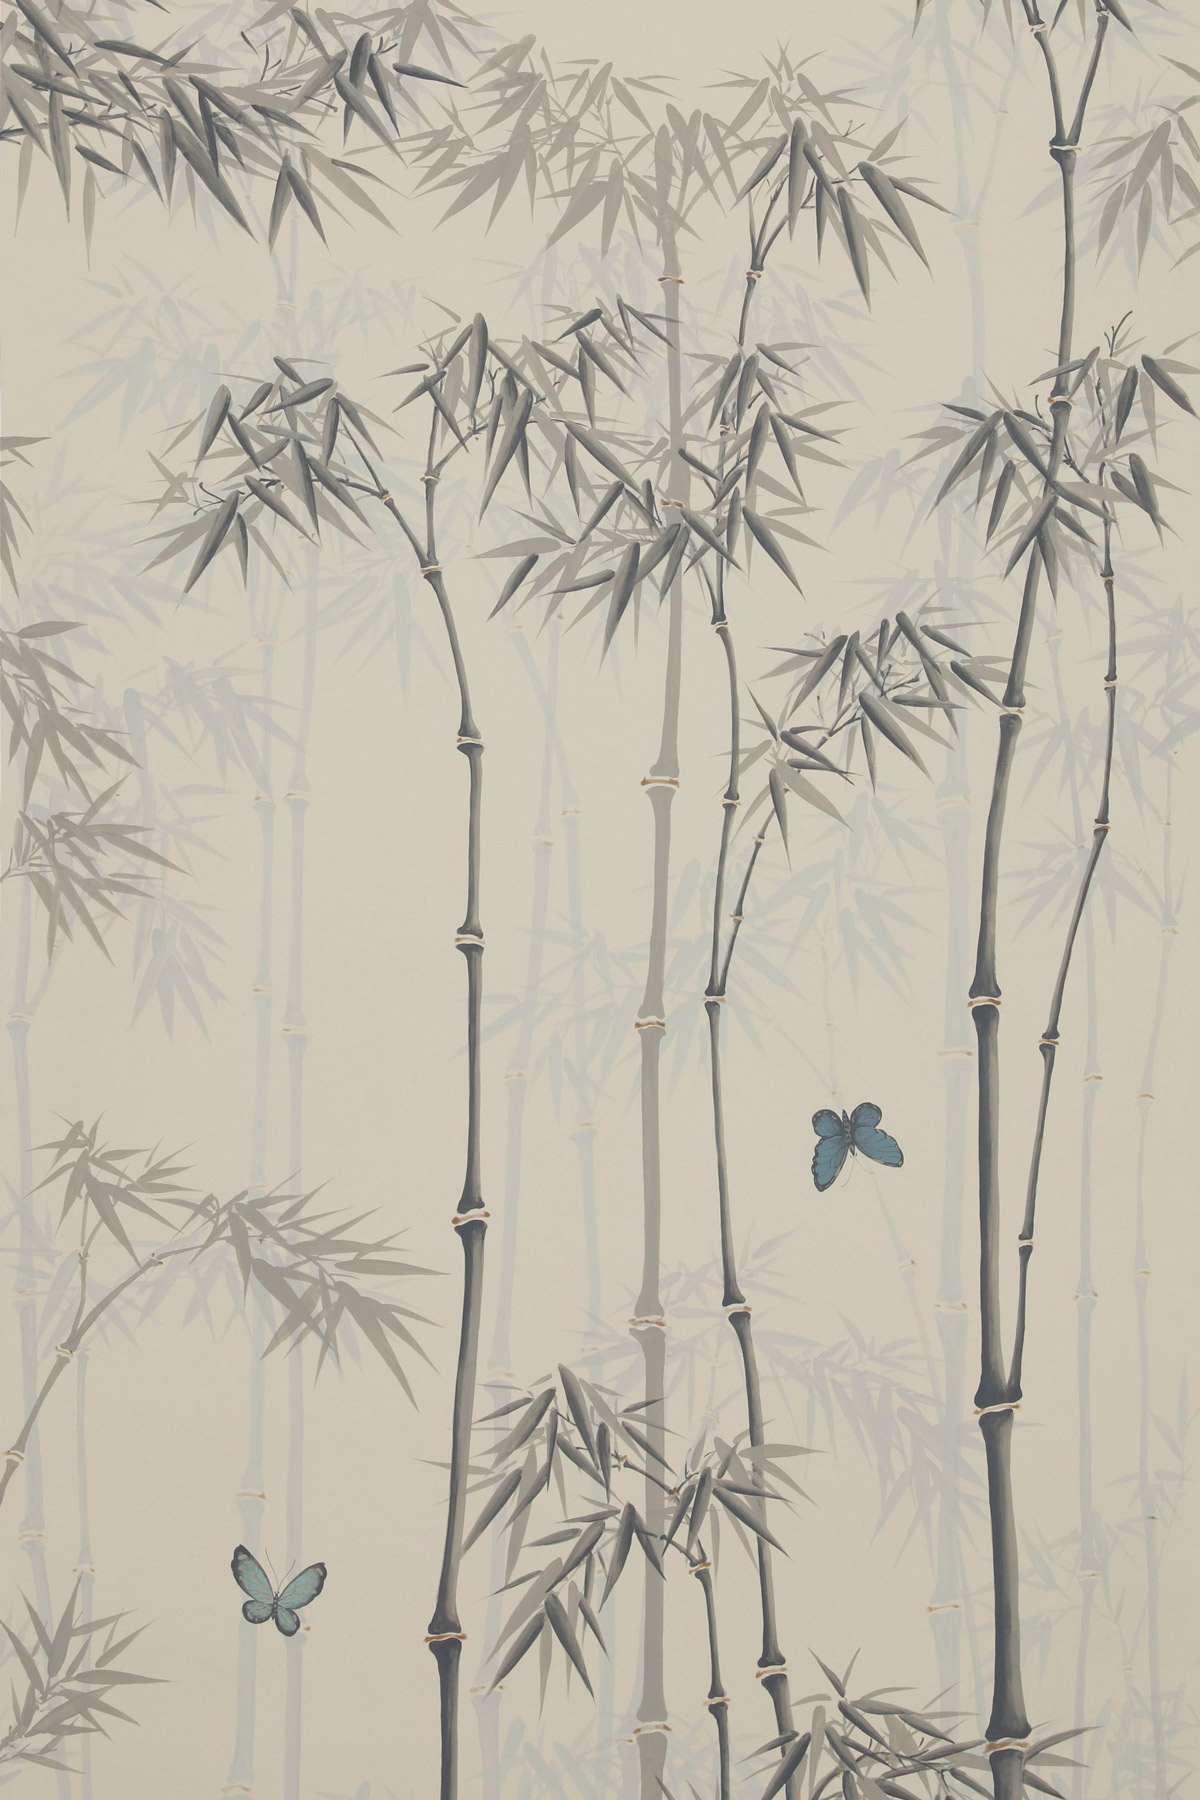 Distant Bamboo